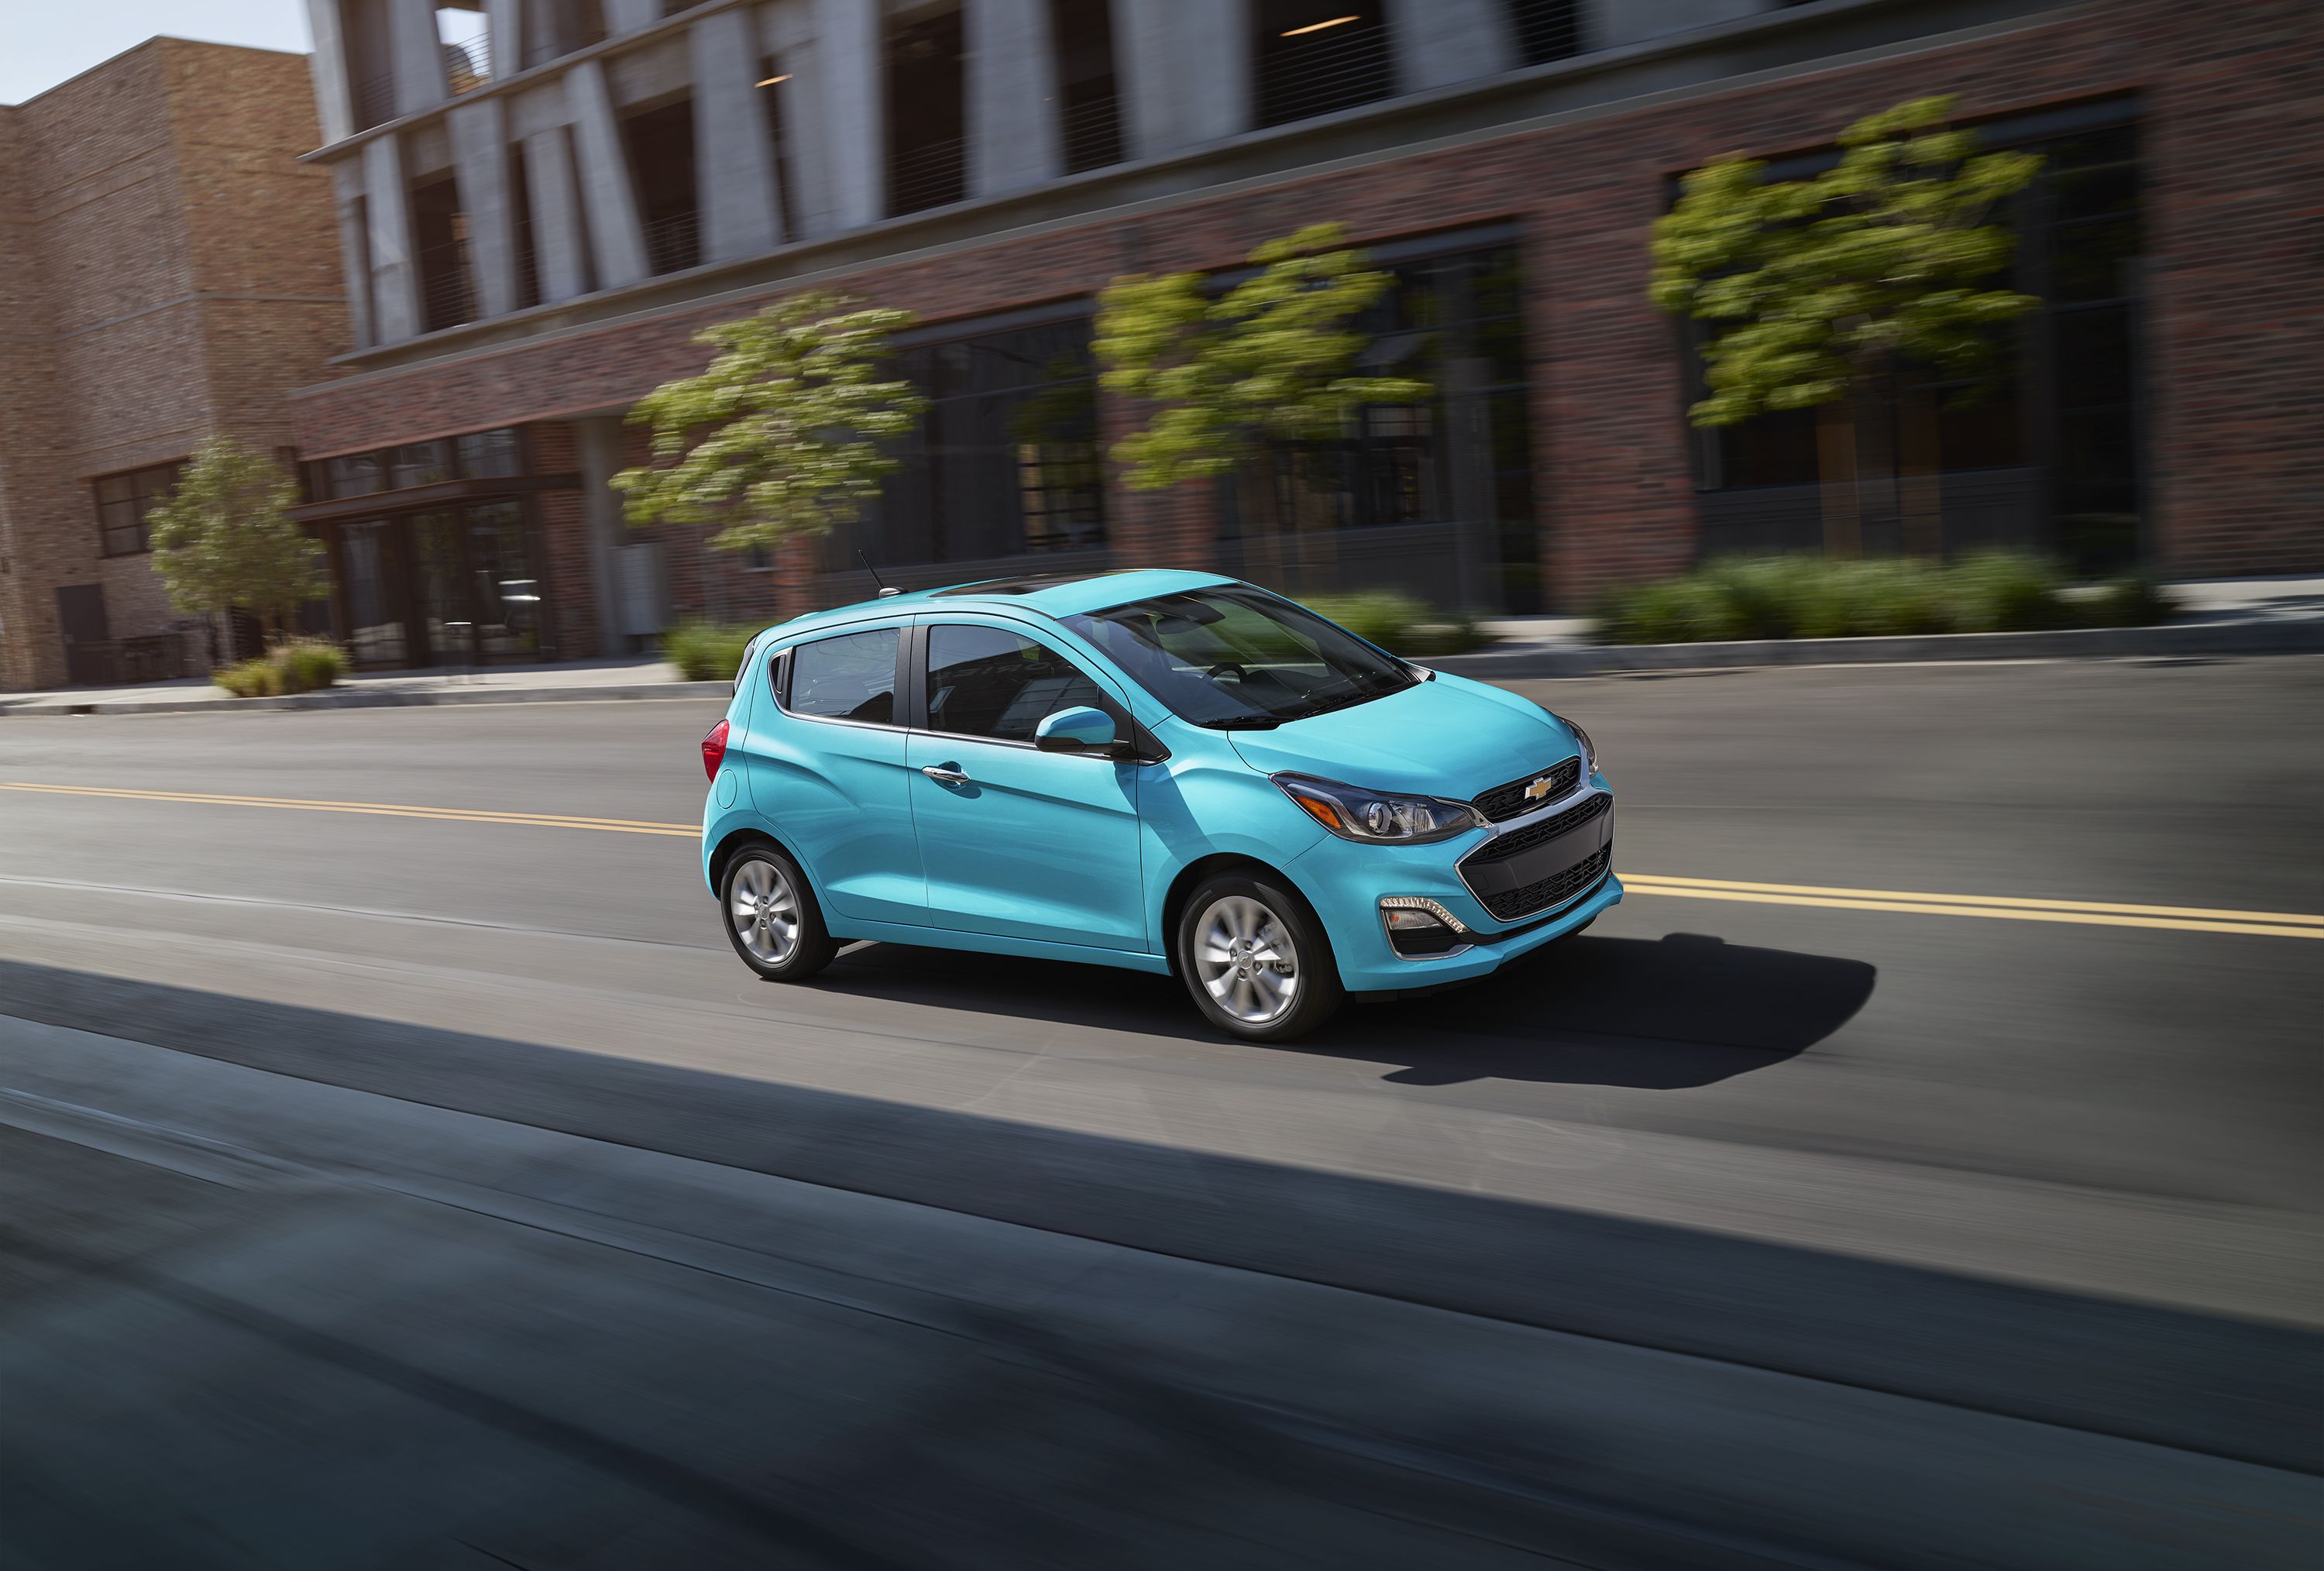 2021 Chevrolet Spark Review, Pricing, and Specs